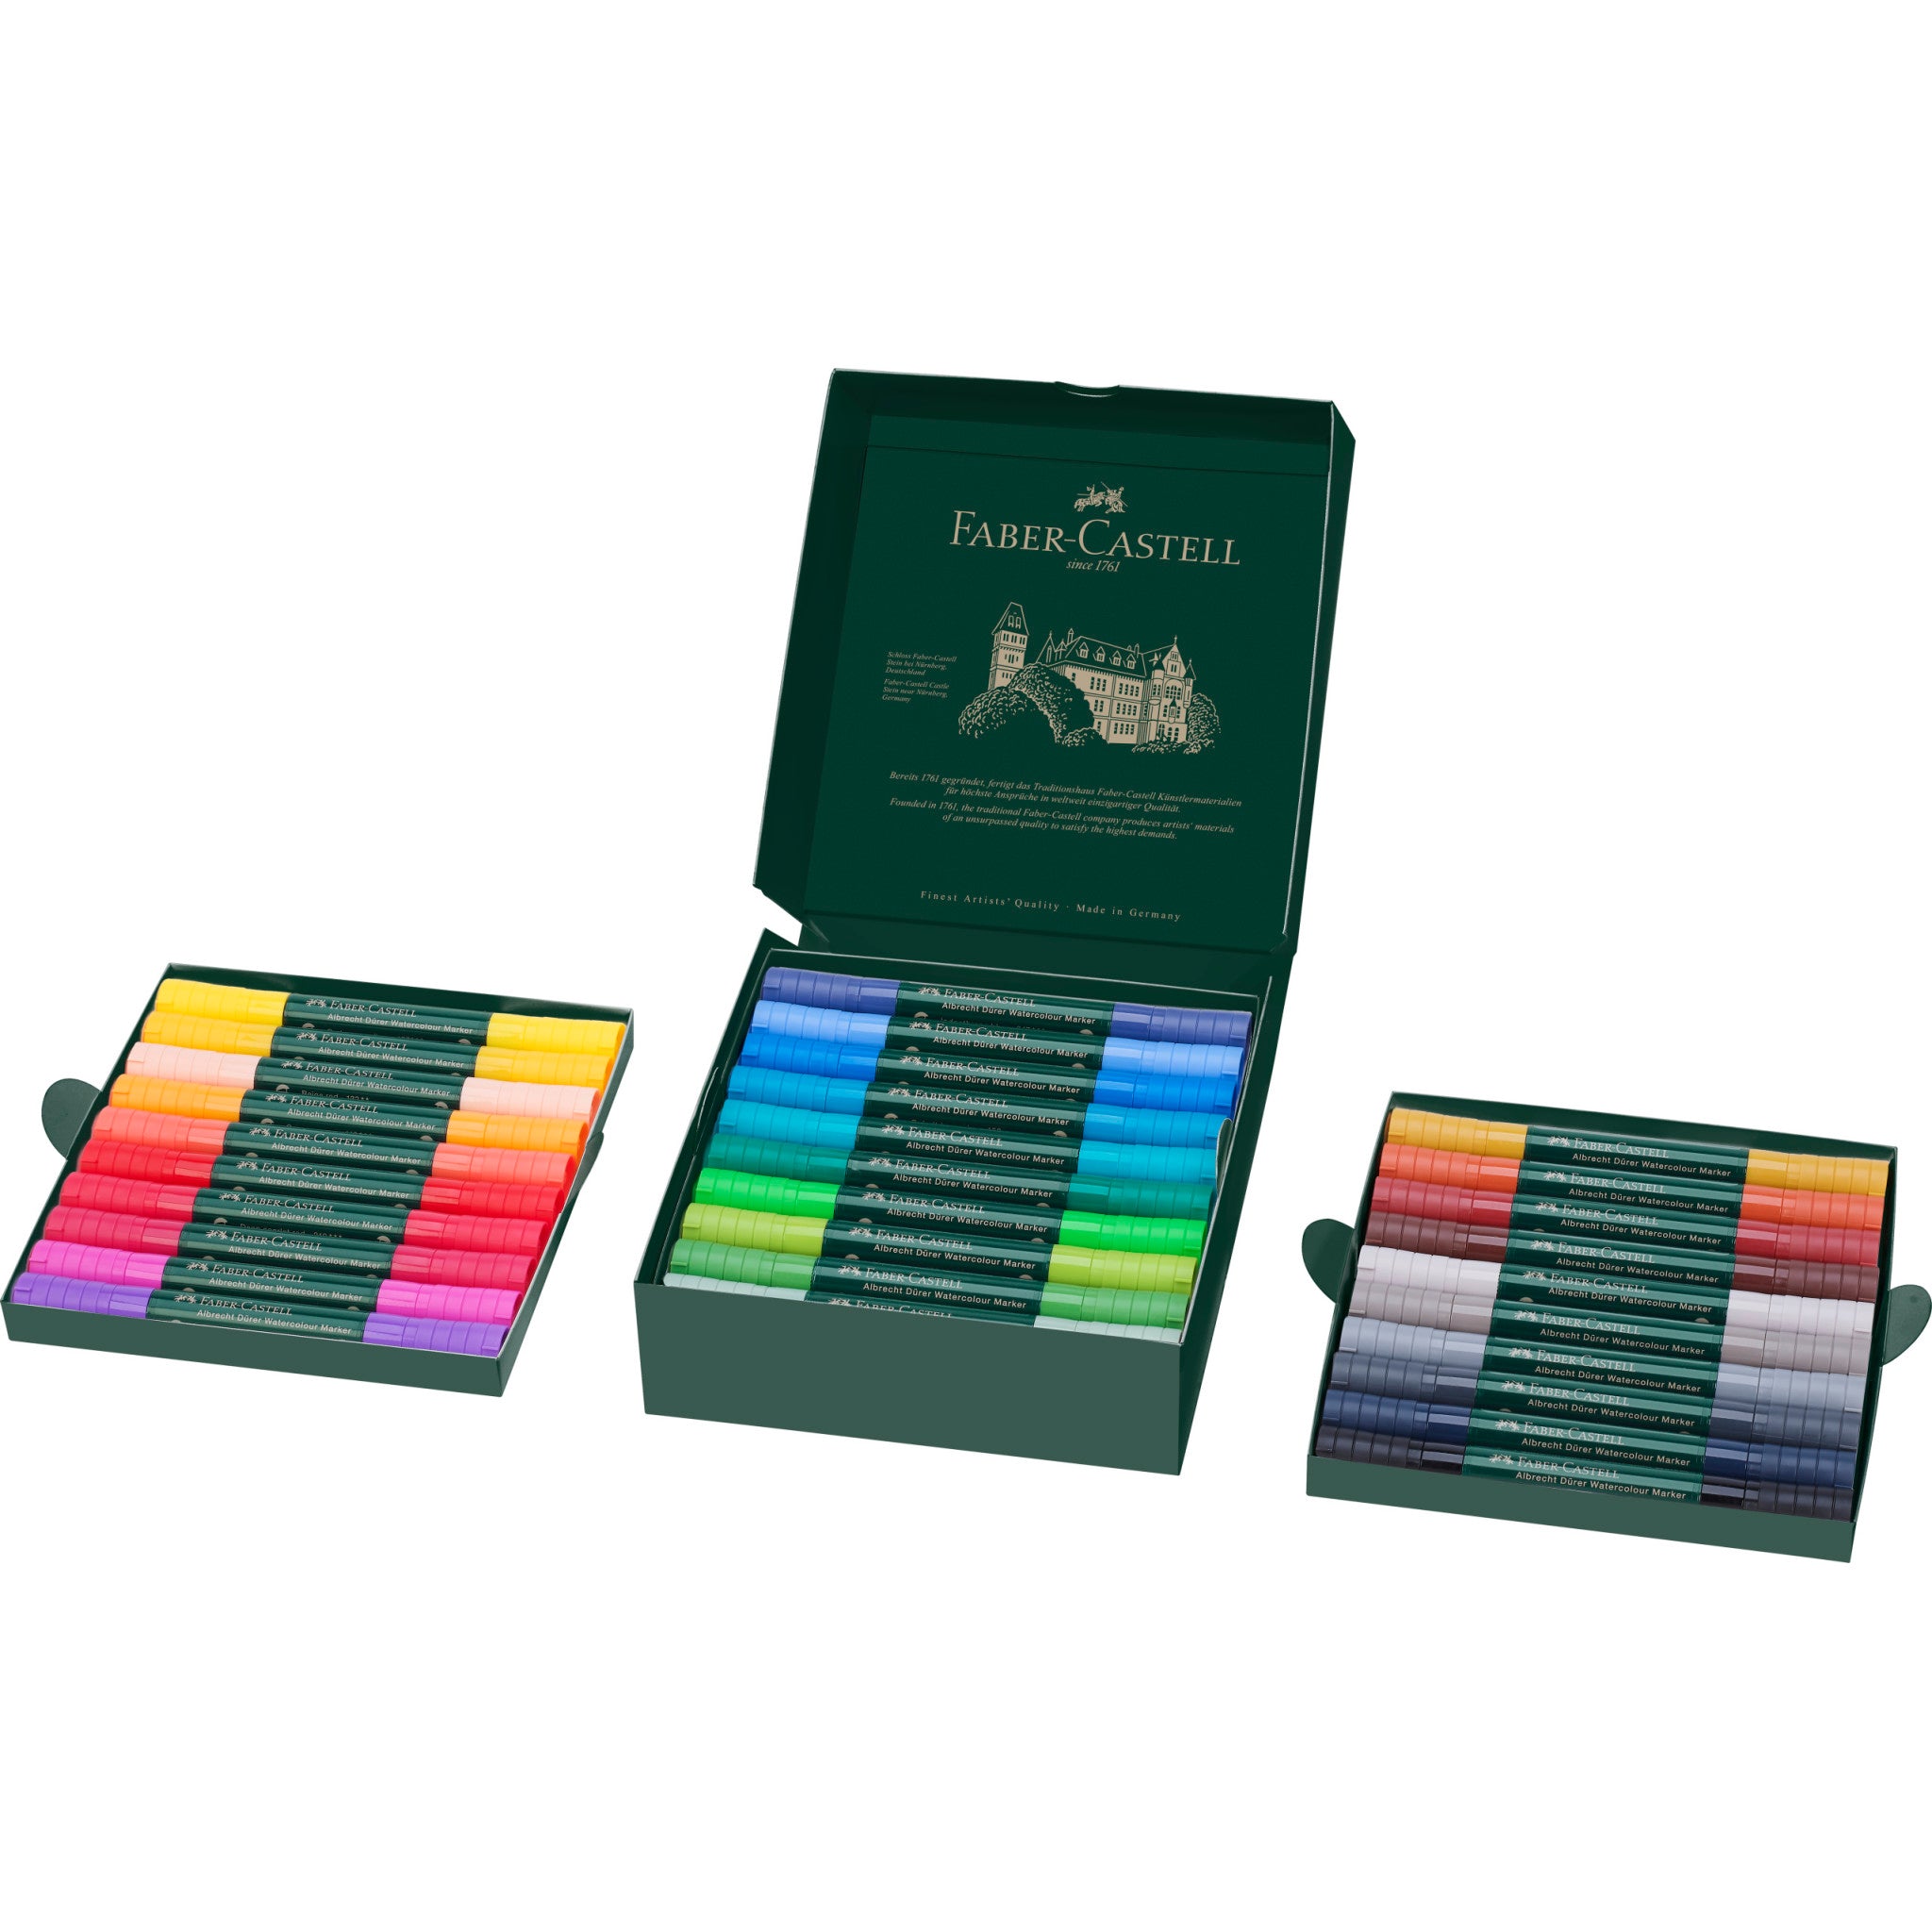  Faber-Castell Art/Graphic 160330 Faber-Castell Albrecht Durer  Artists' Watercolor Markers – 30 Assorted Colors – Multipurpose Art Markers